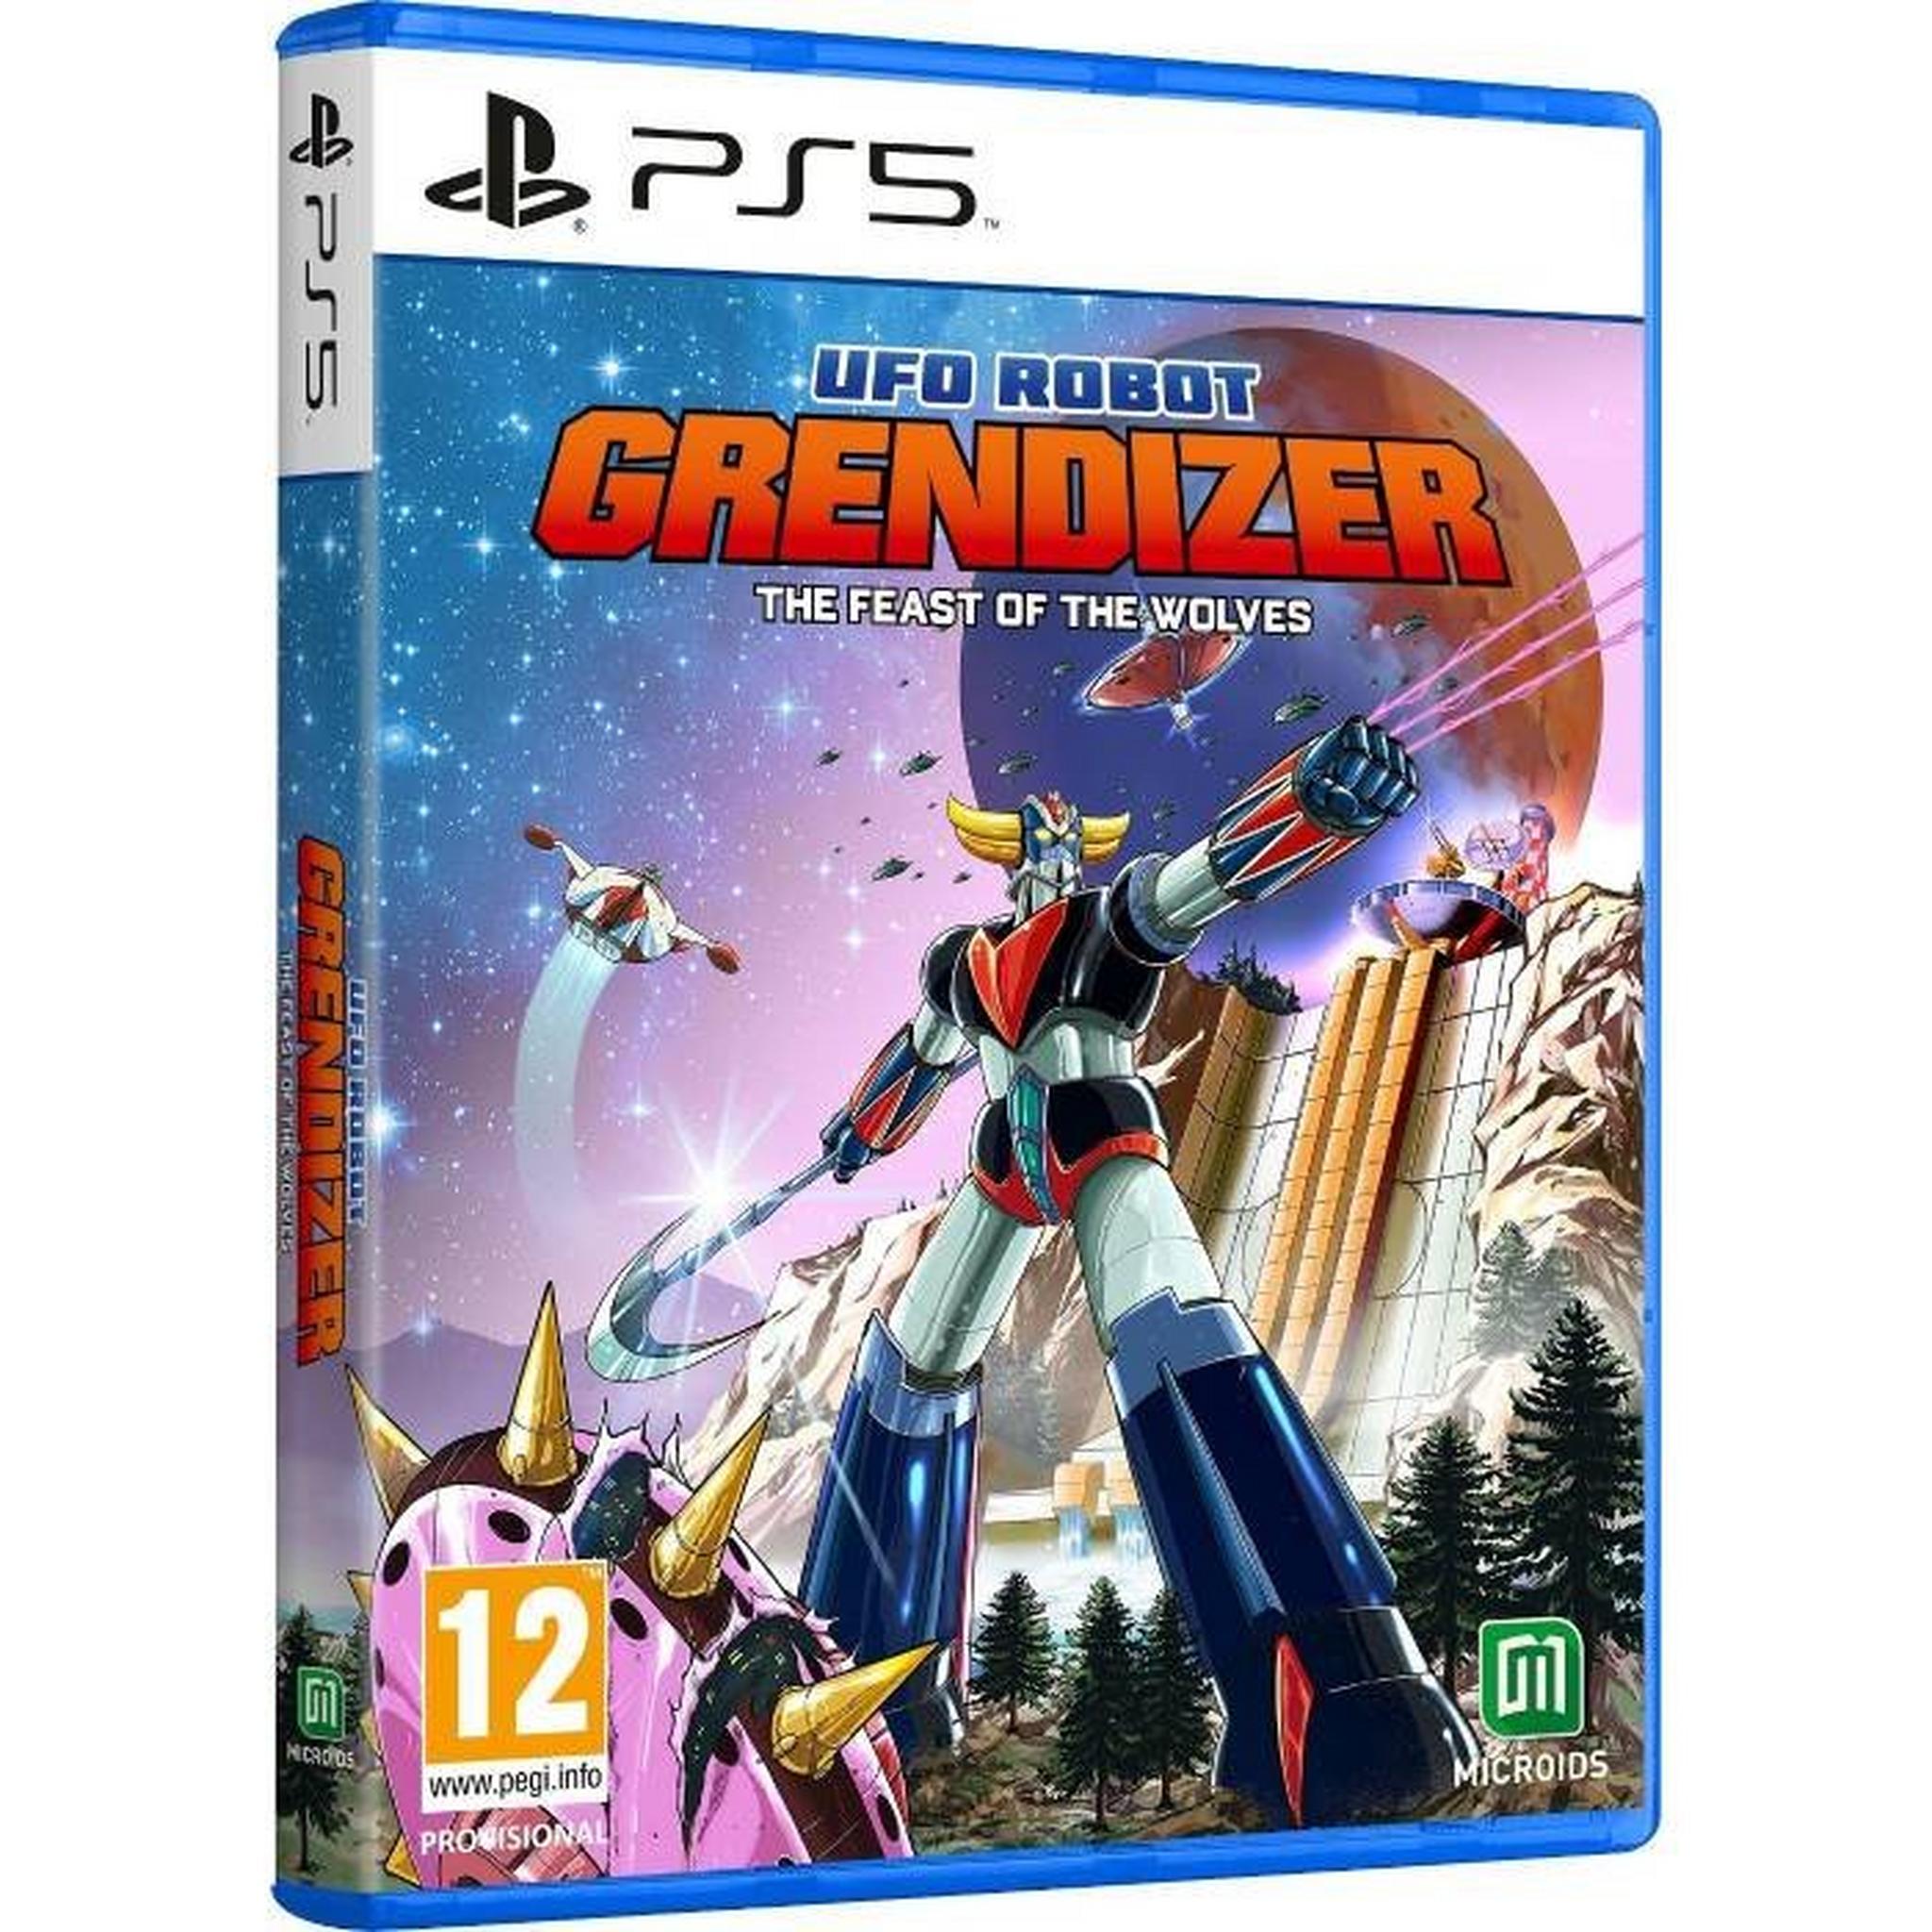 UFO Robot Grendizer - The Feast of The Wolves Edition – PS5 Game